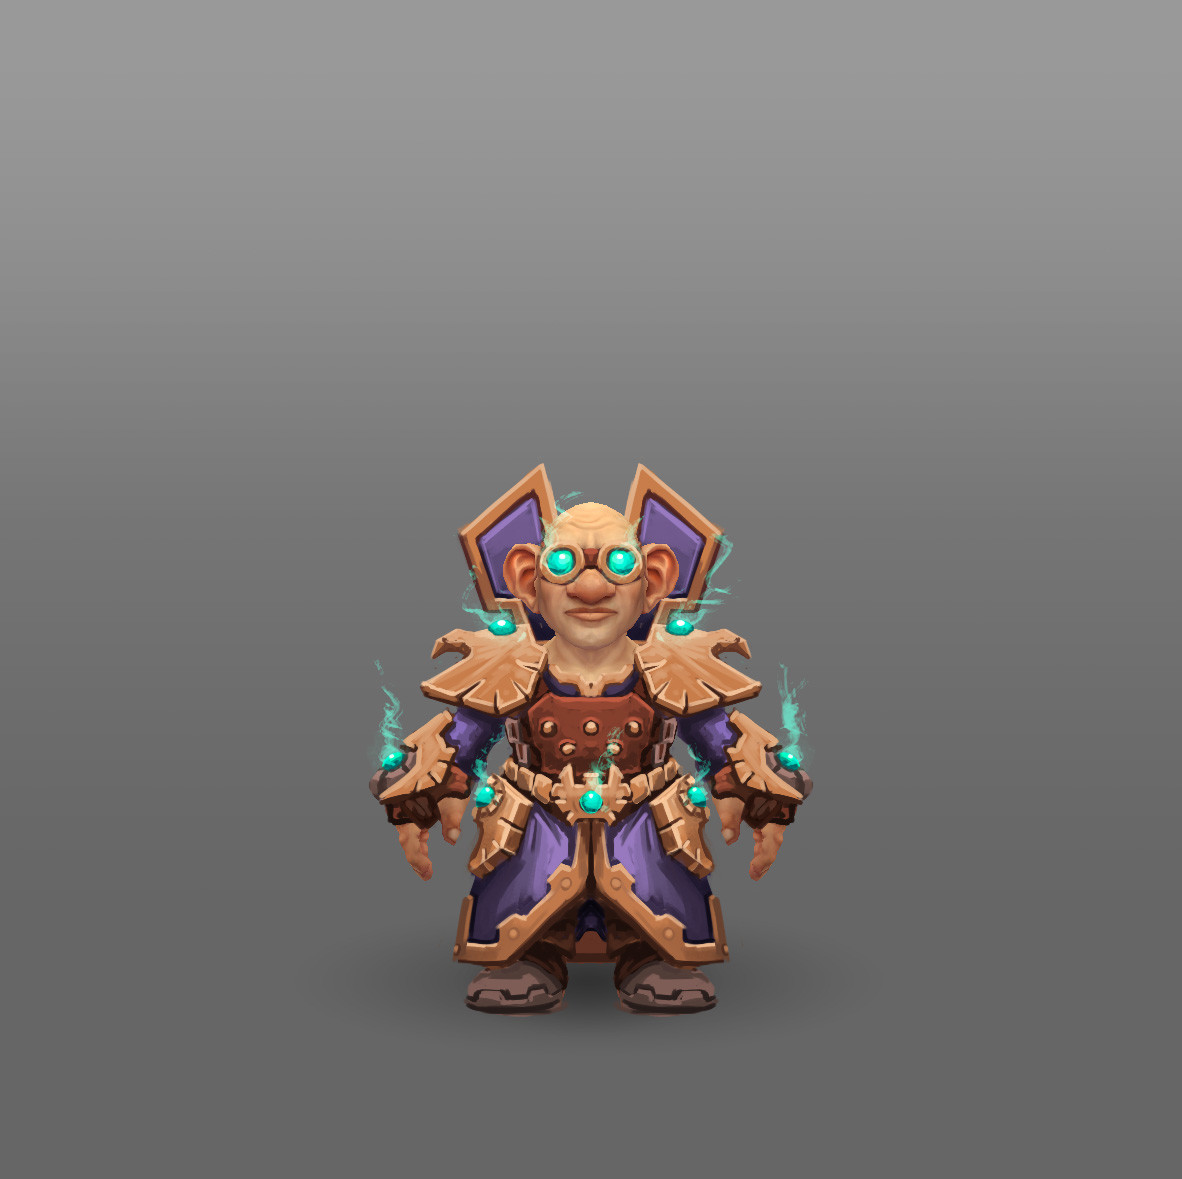 Mage
Back when designing this, I wanted to create a magister type of set with a gnomish flair